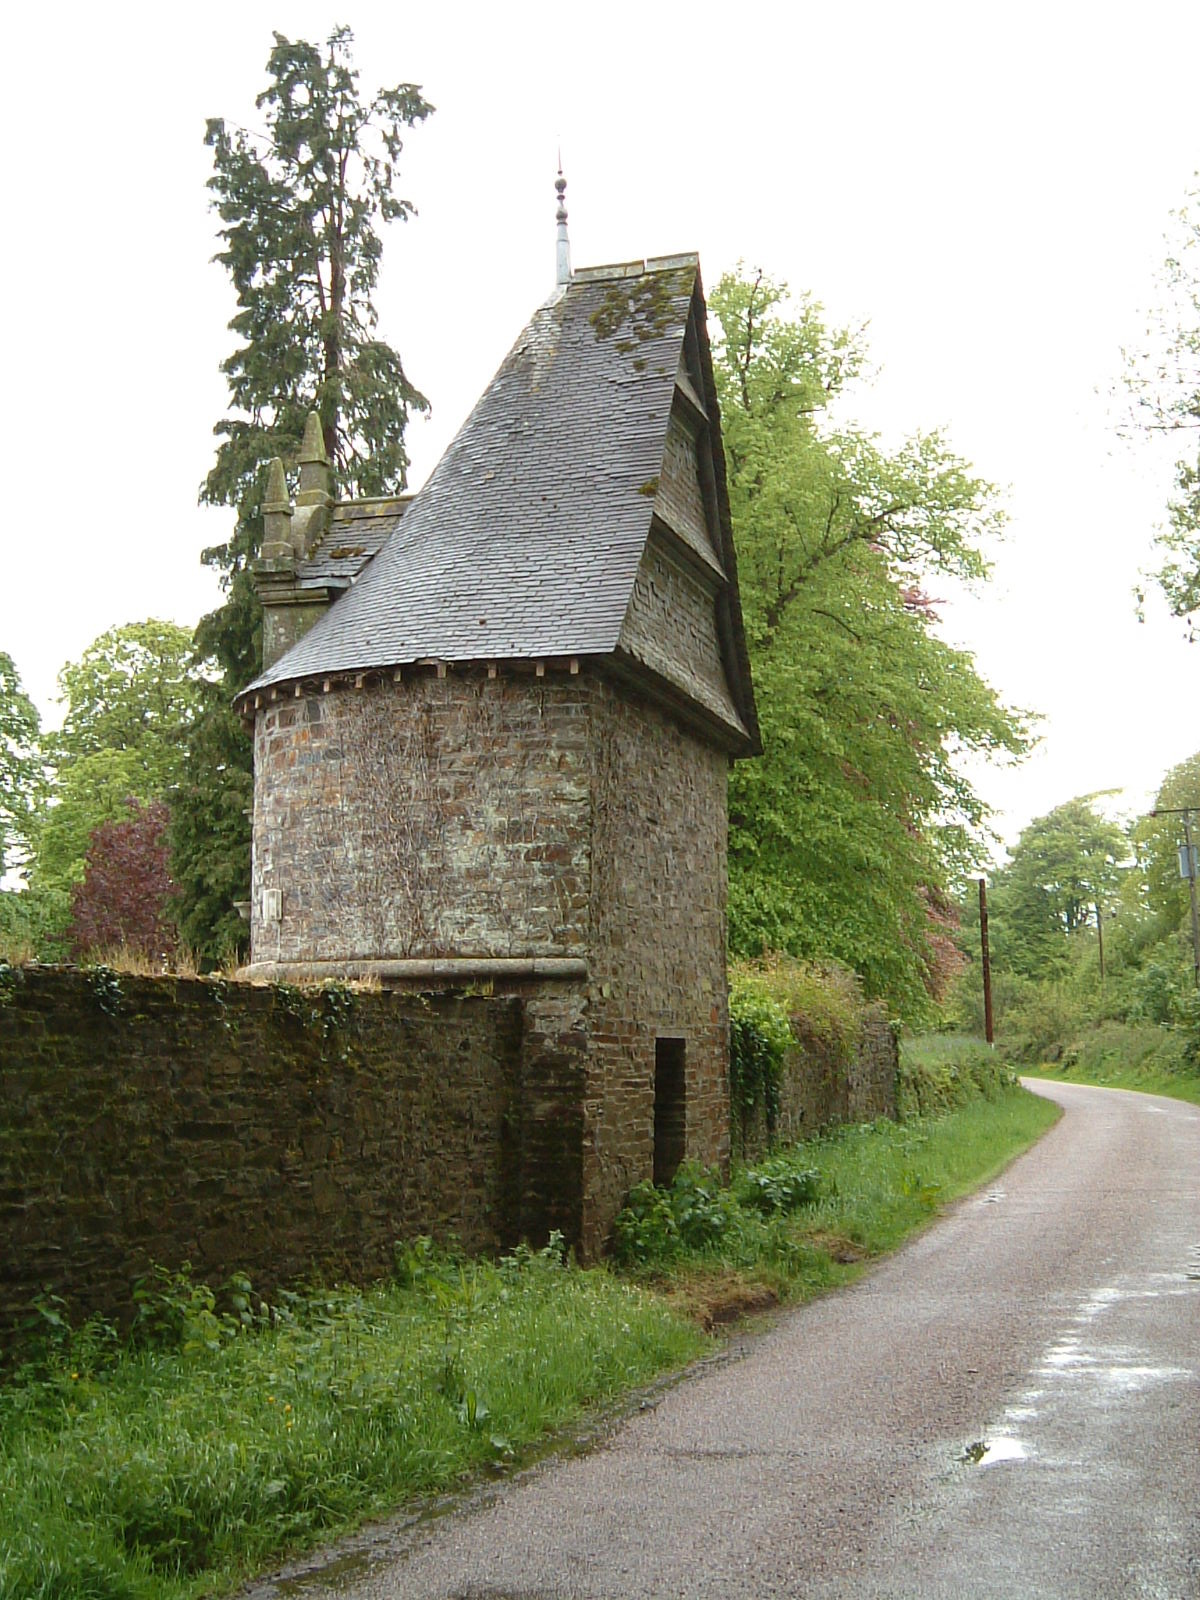 A dovecote designed by the Reverend Sabine-Gould at Lewtrenchard Manor Hotel